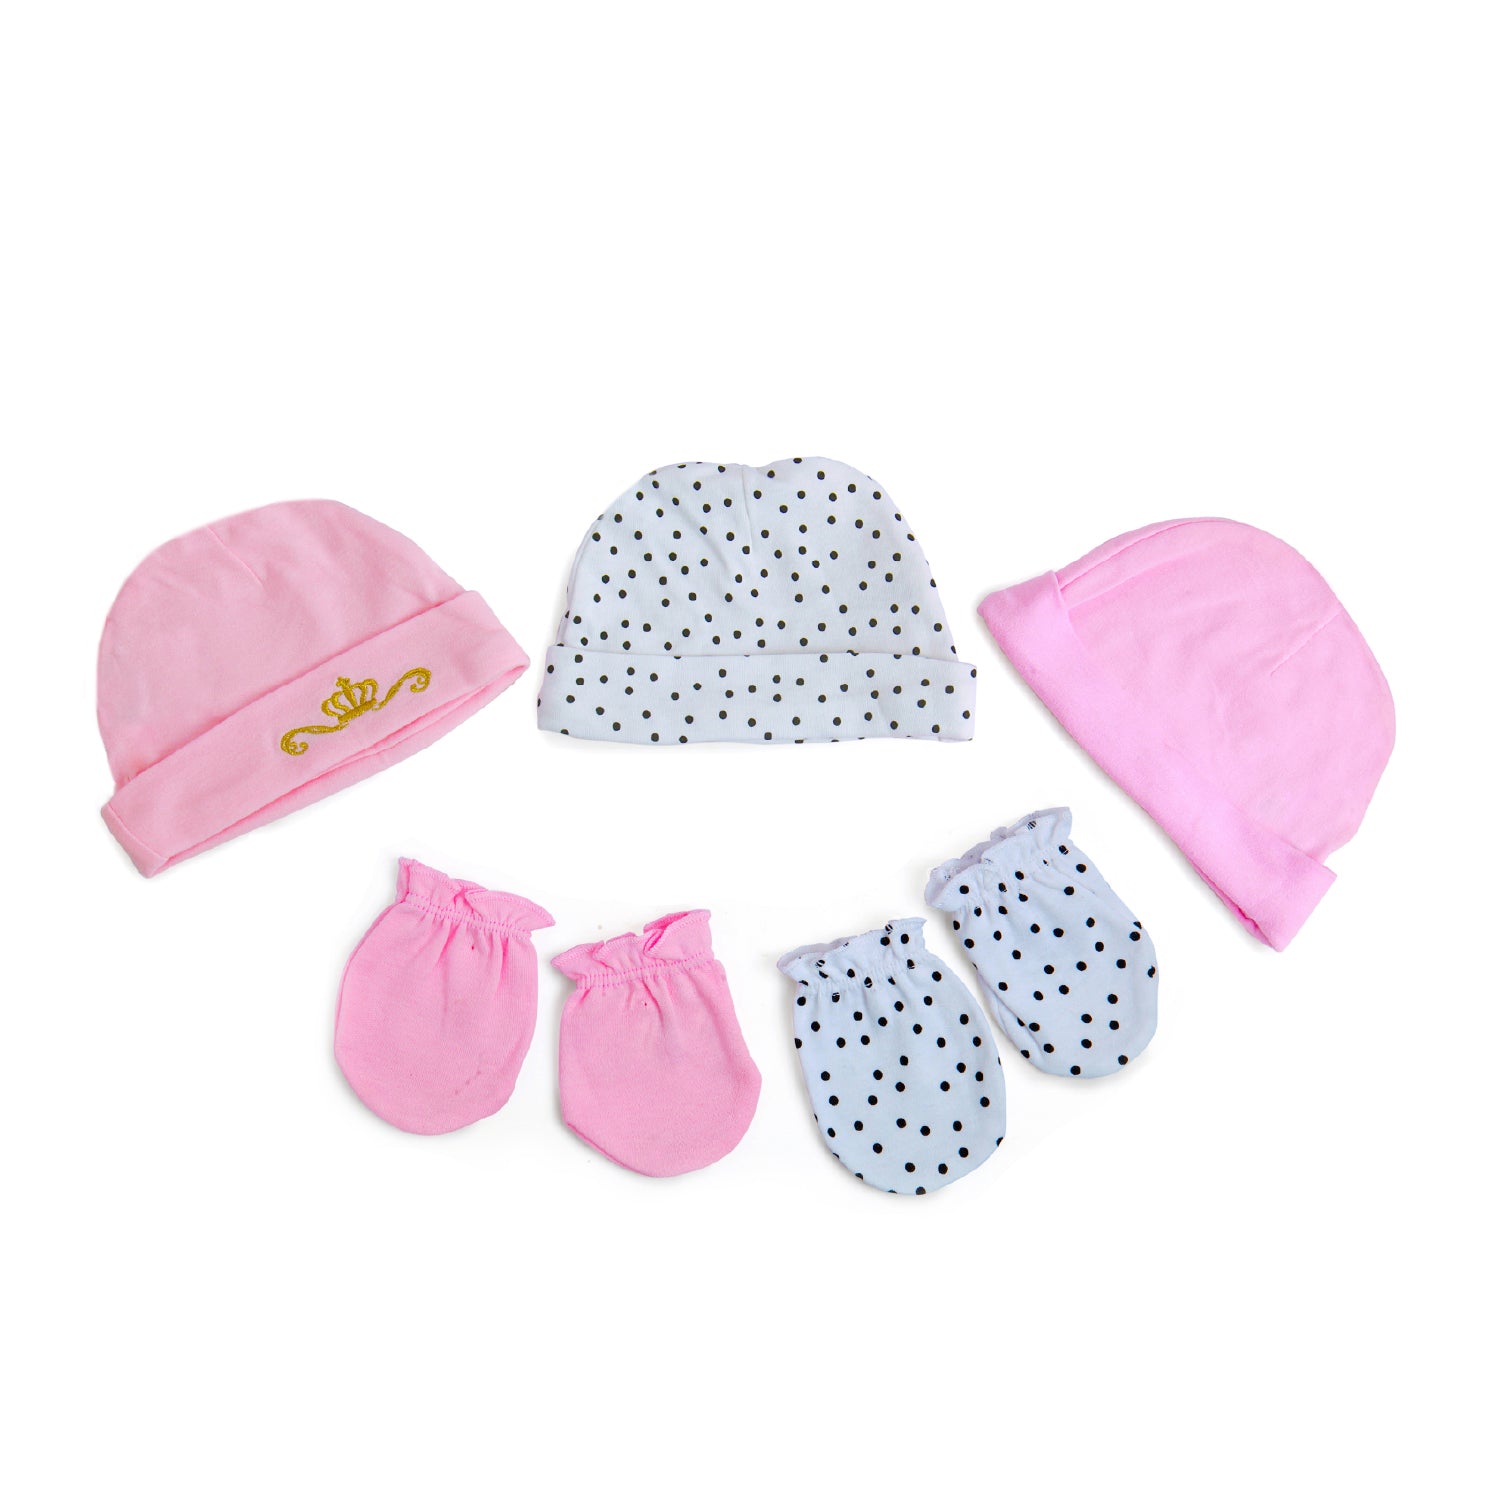 Daddy's Princess Pink Set Of 3 Caps And 2 Mittens - Baby Moo